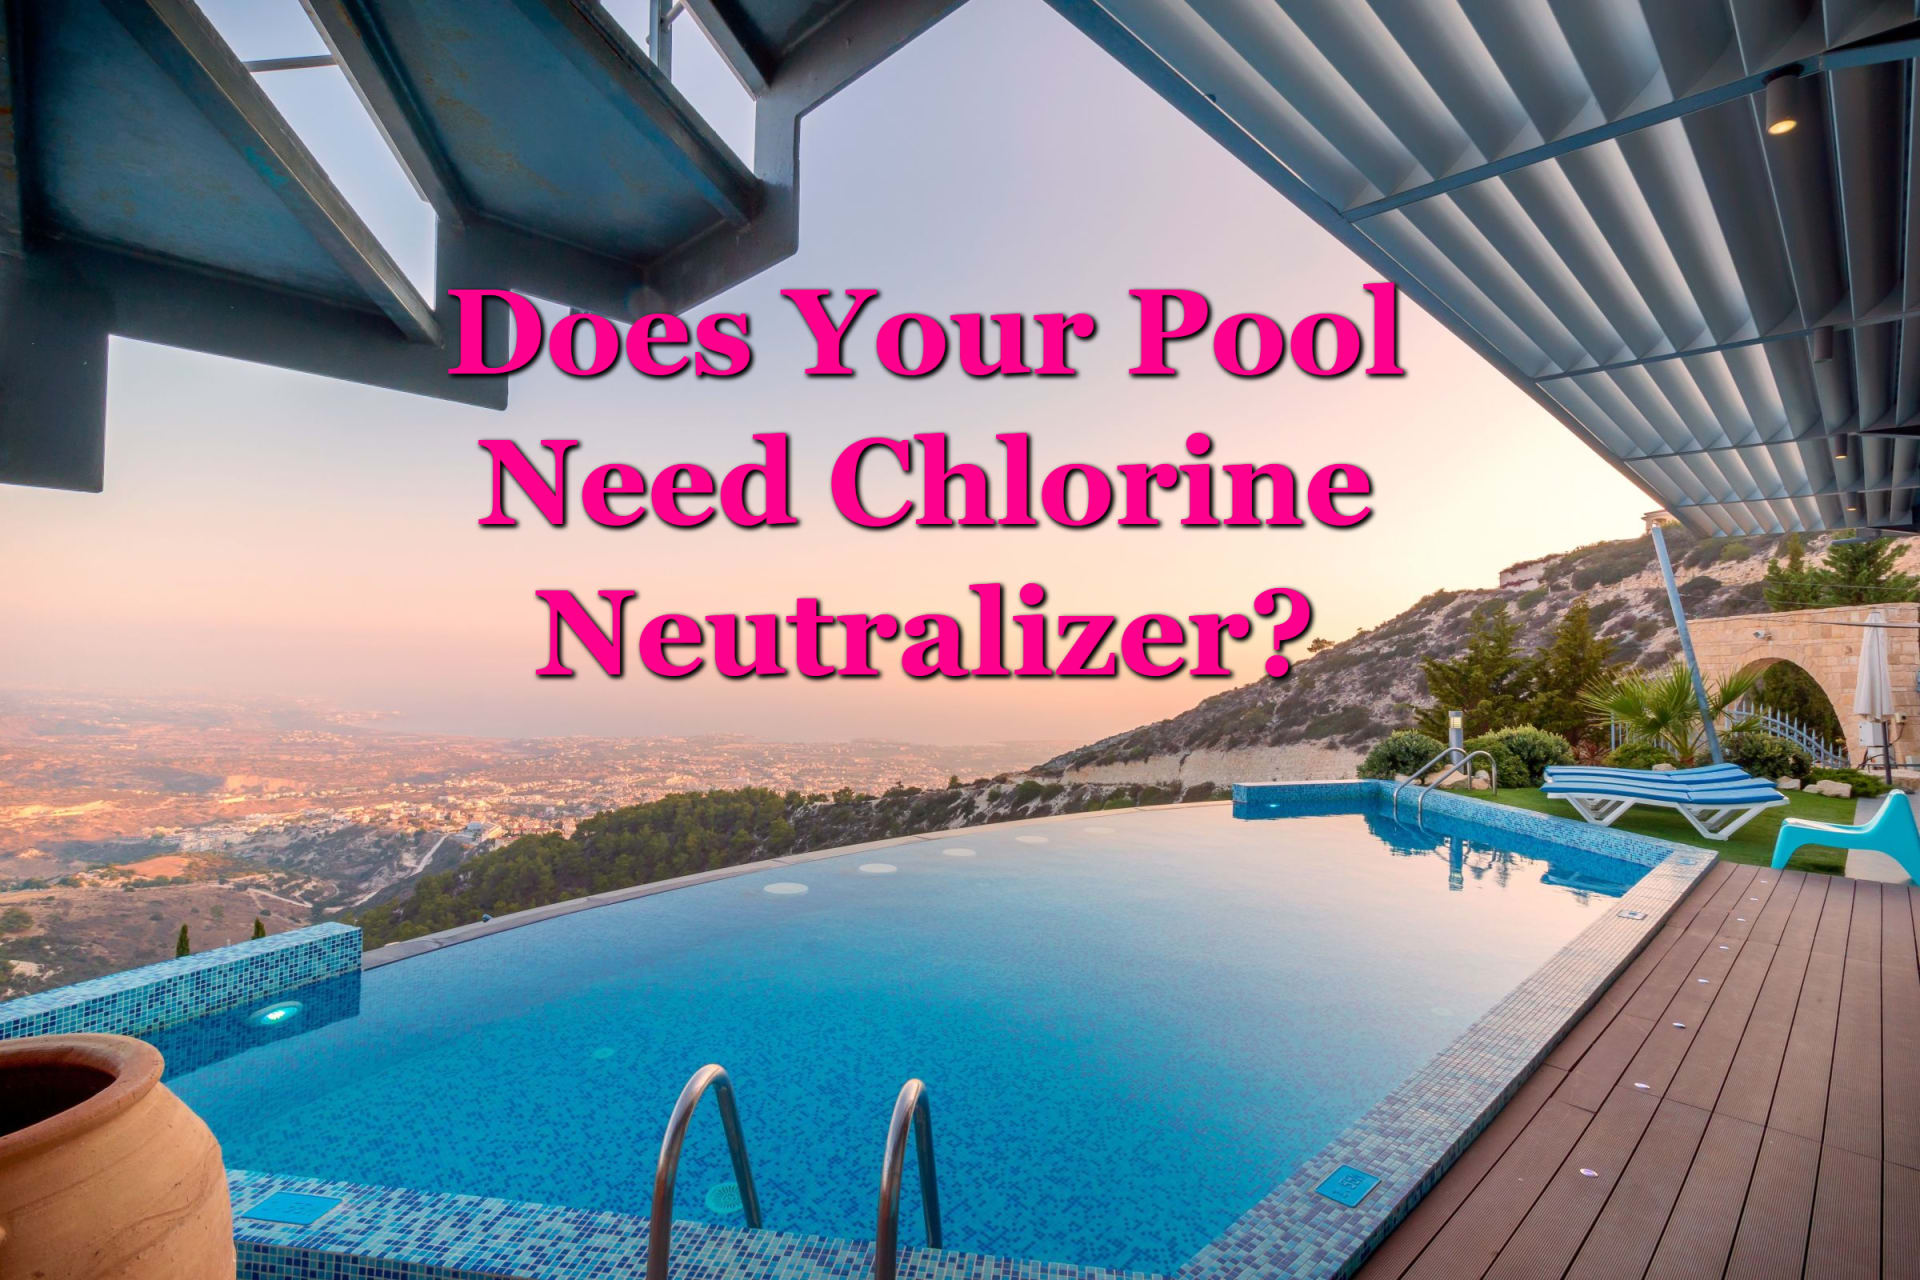 A swimming pool that may need chlorine neutralizer